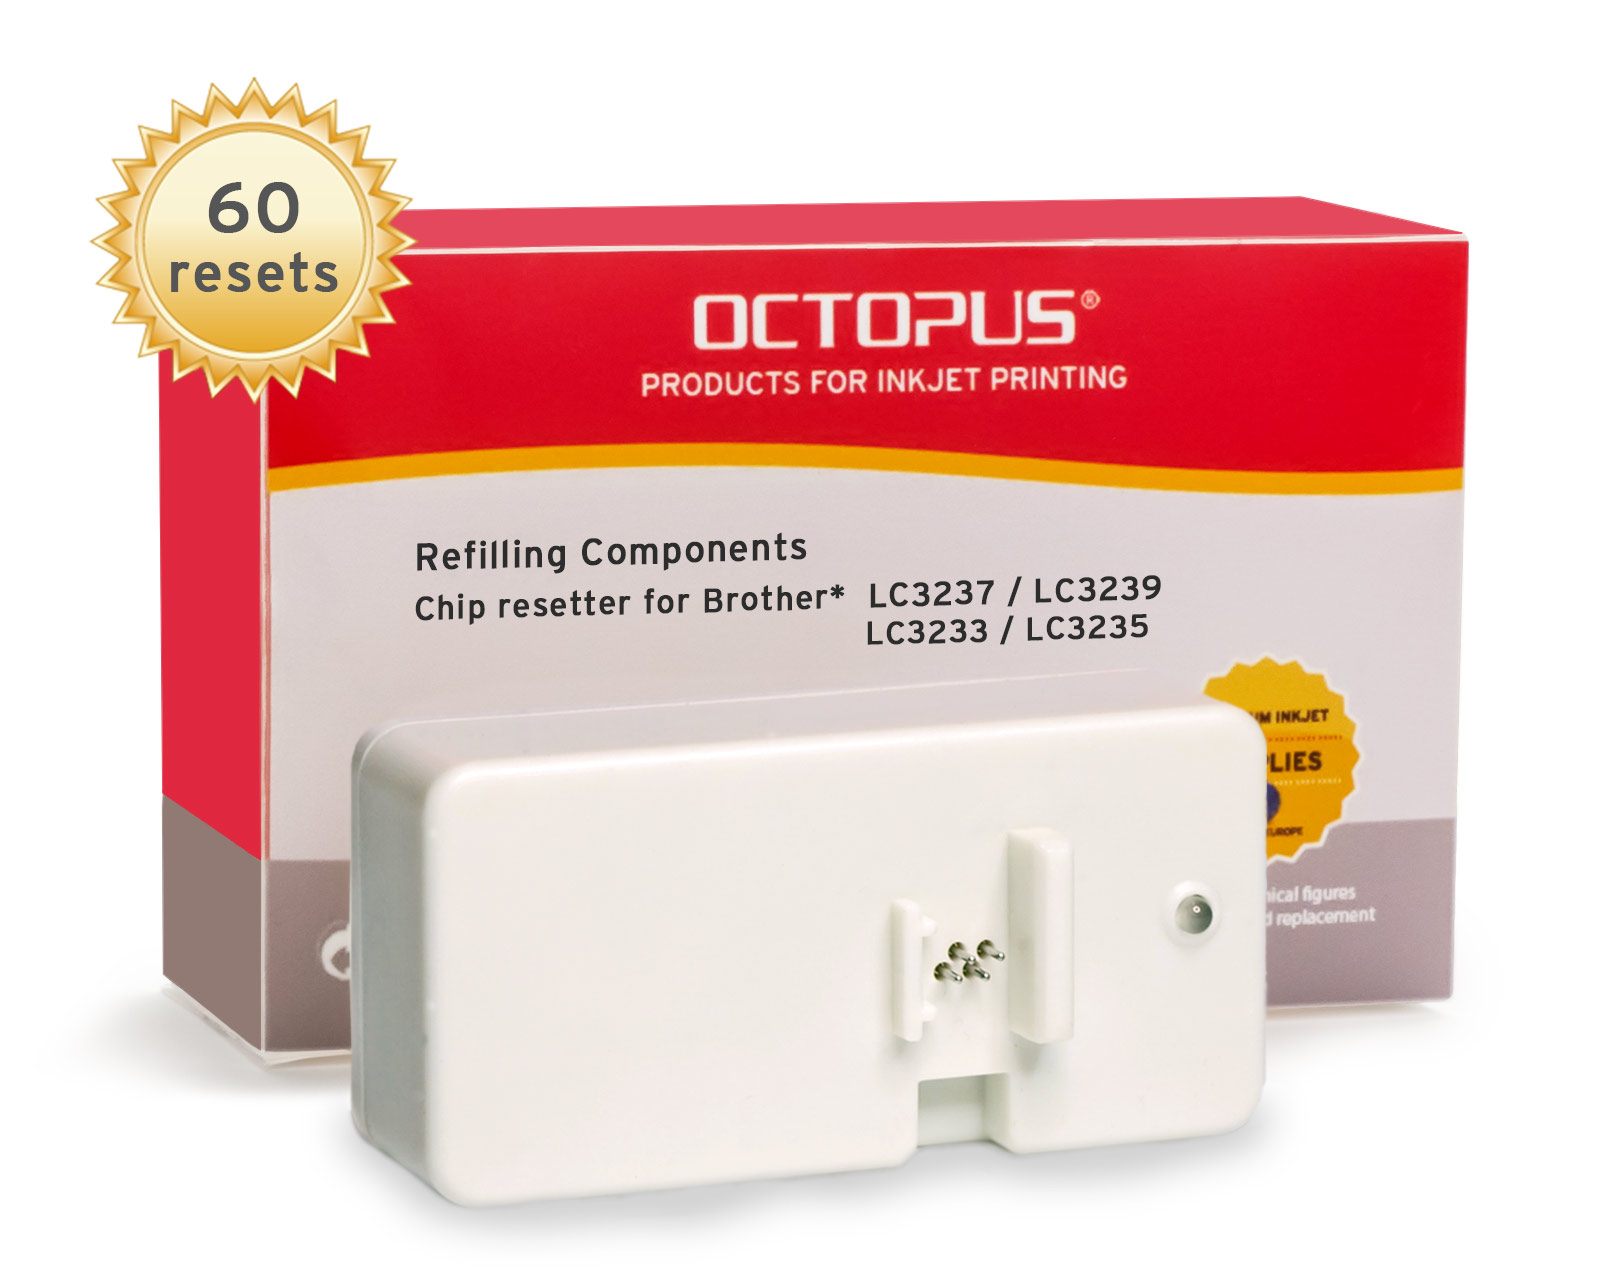 Chipresetter for Brother LC-3237, LC-3239, LC-3233, LC-3235 inkjet cartridges, for 60 Resets